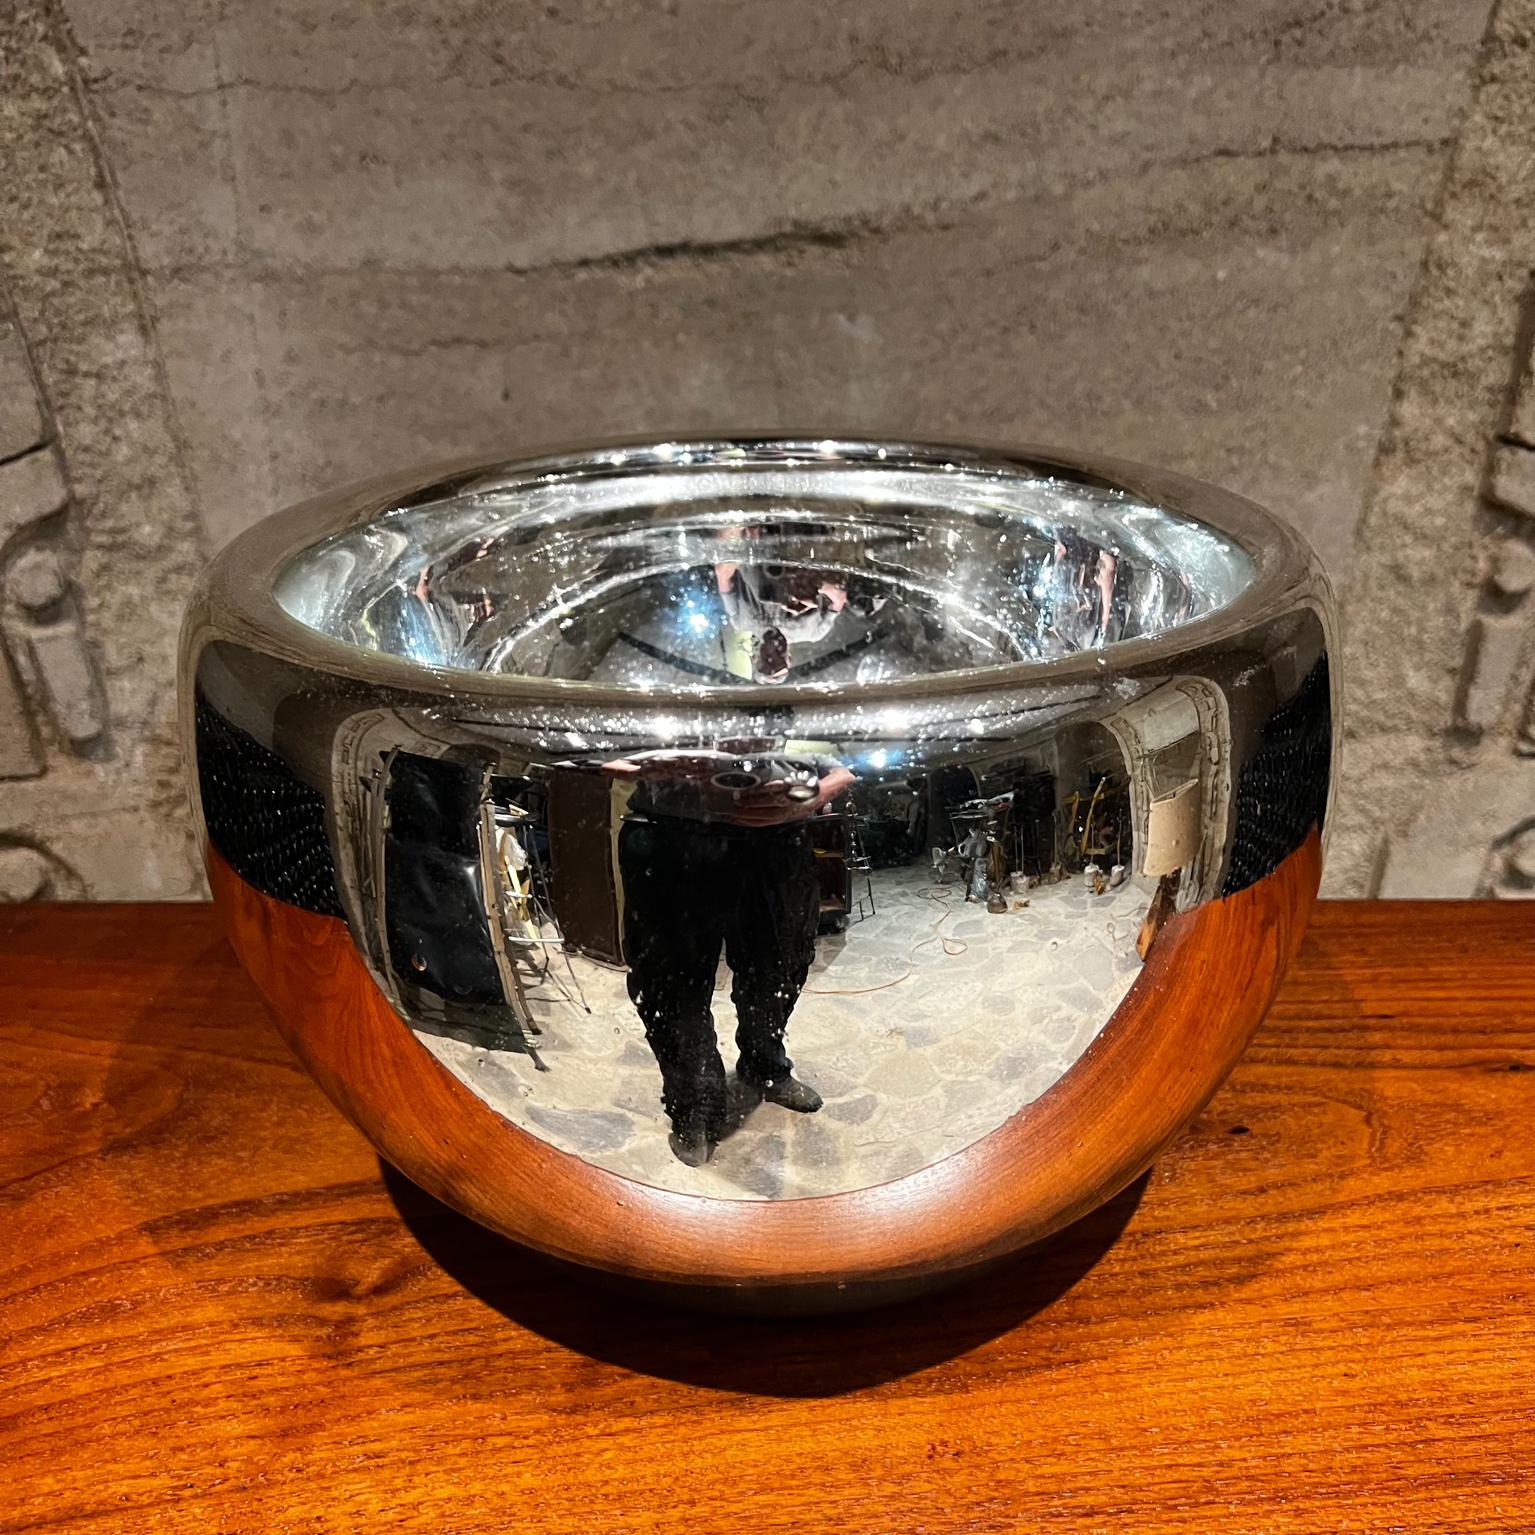 Fabulous hand blown mercury glass bowl made in Mexico, circa 1950s.
Ideal as catch all, fruit etc. decorative art.
In the Style of Luis Barragan.
Measures: 8 tall x 12 diameter.
Preowned vintage condition
Please refer to all images.